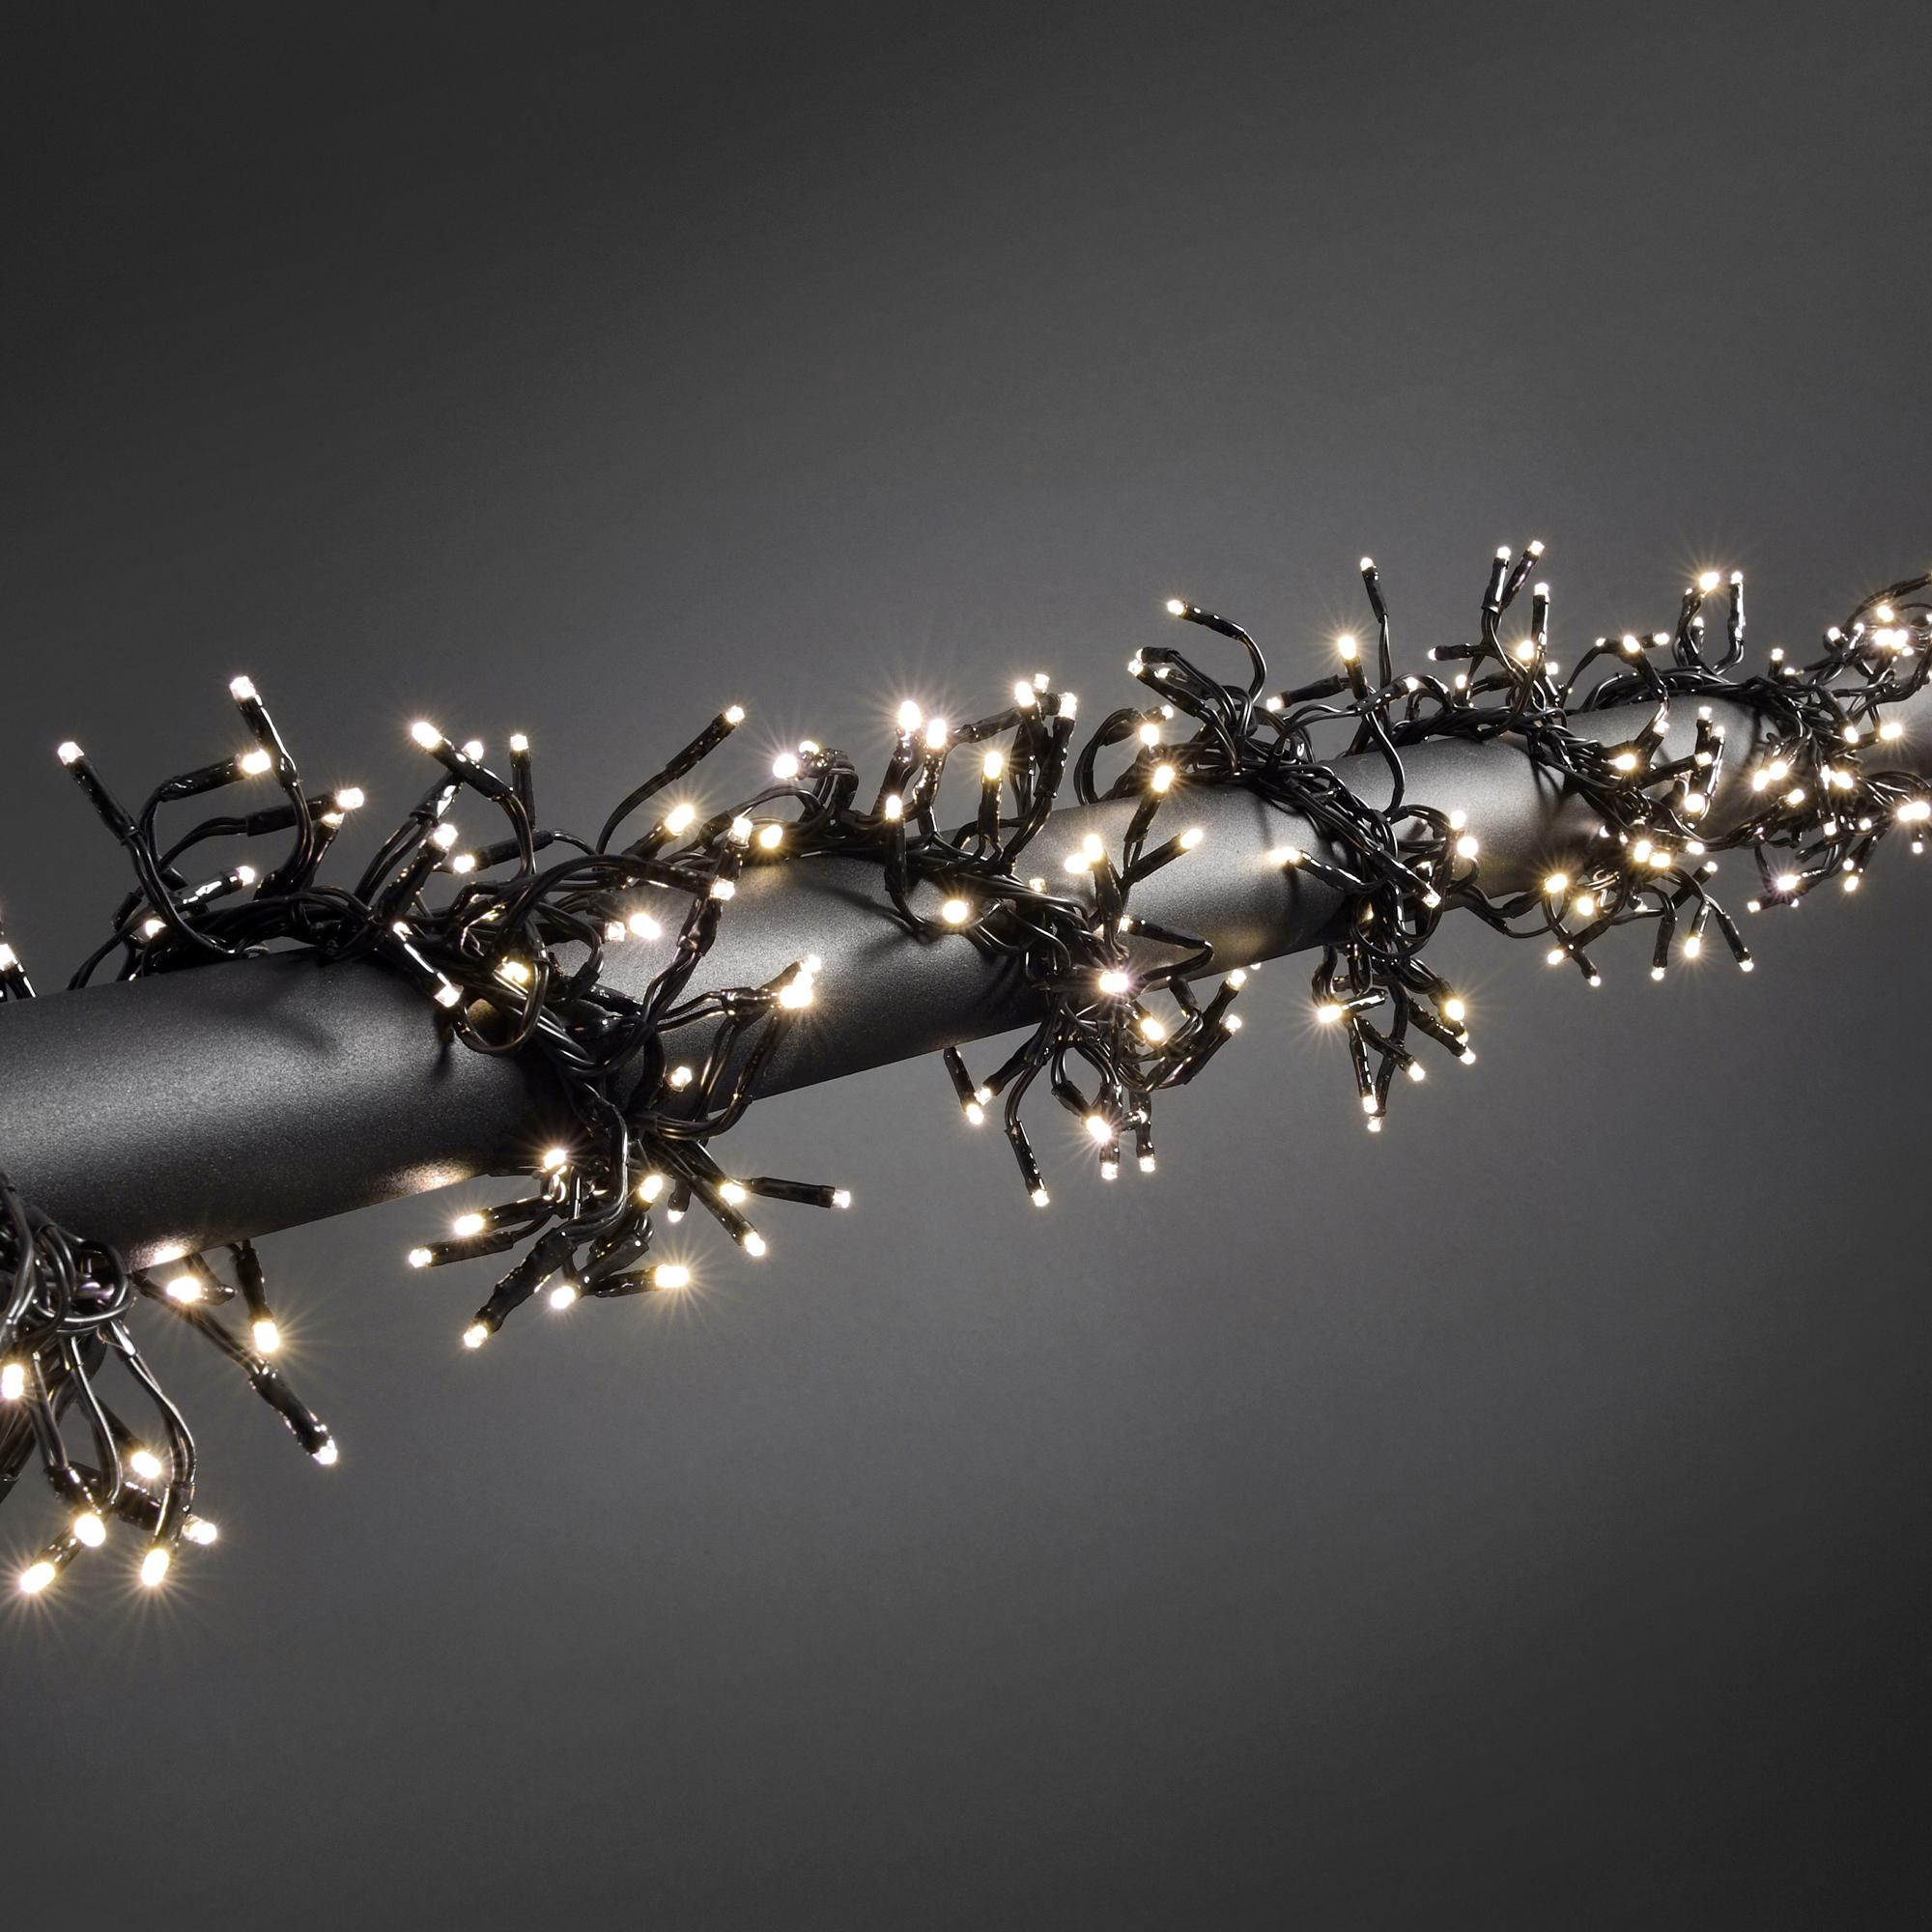 LED Cluster Chain of Lights, warm white 14m (1152LEDs), 8 Functions